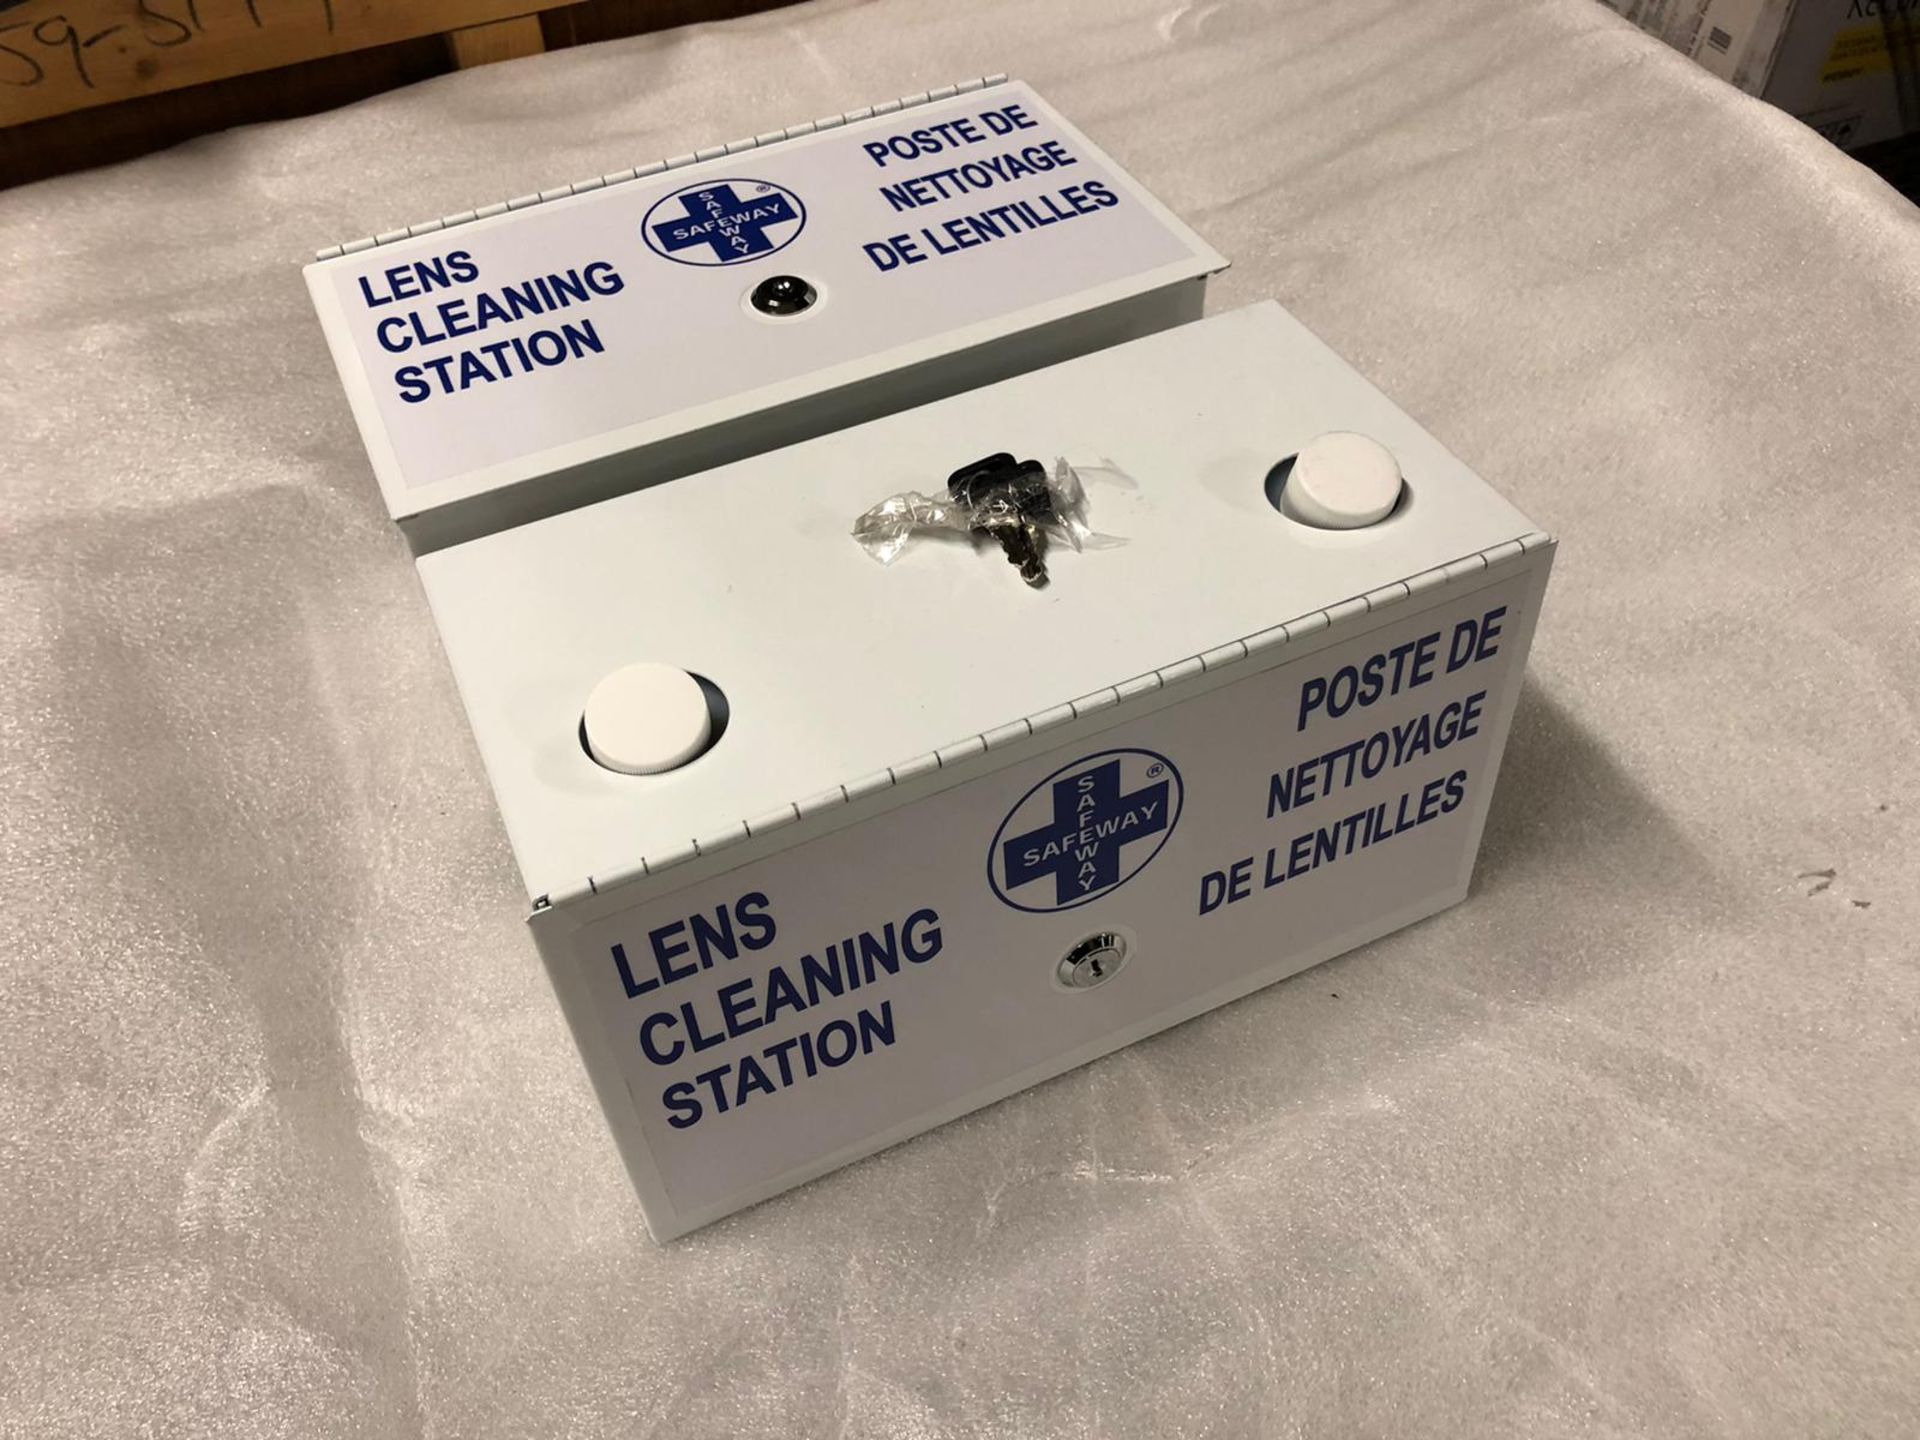 Lot of 2 Lens Cleaning station - Image 2 of 2